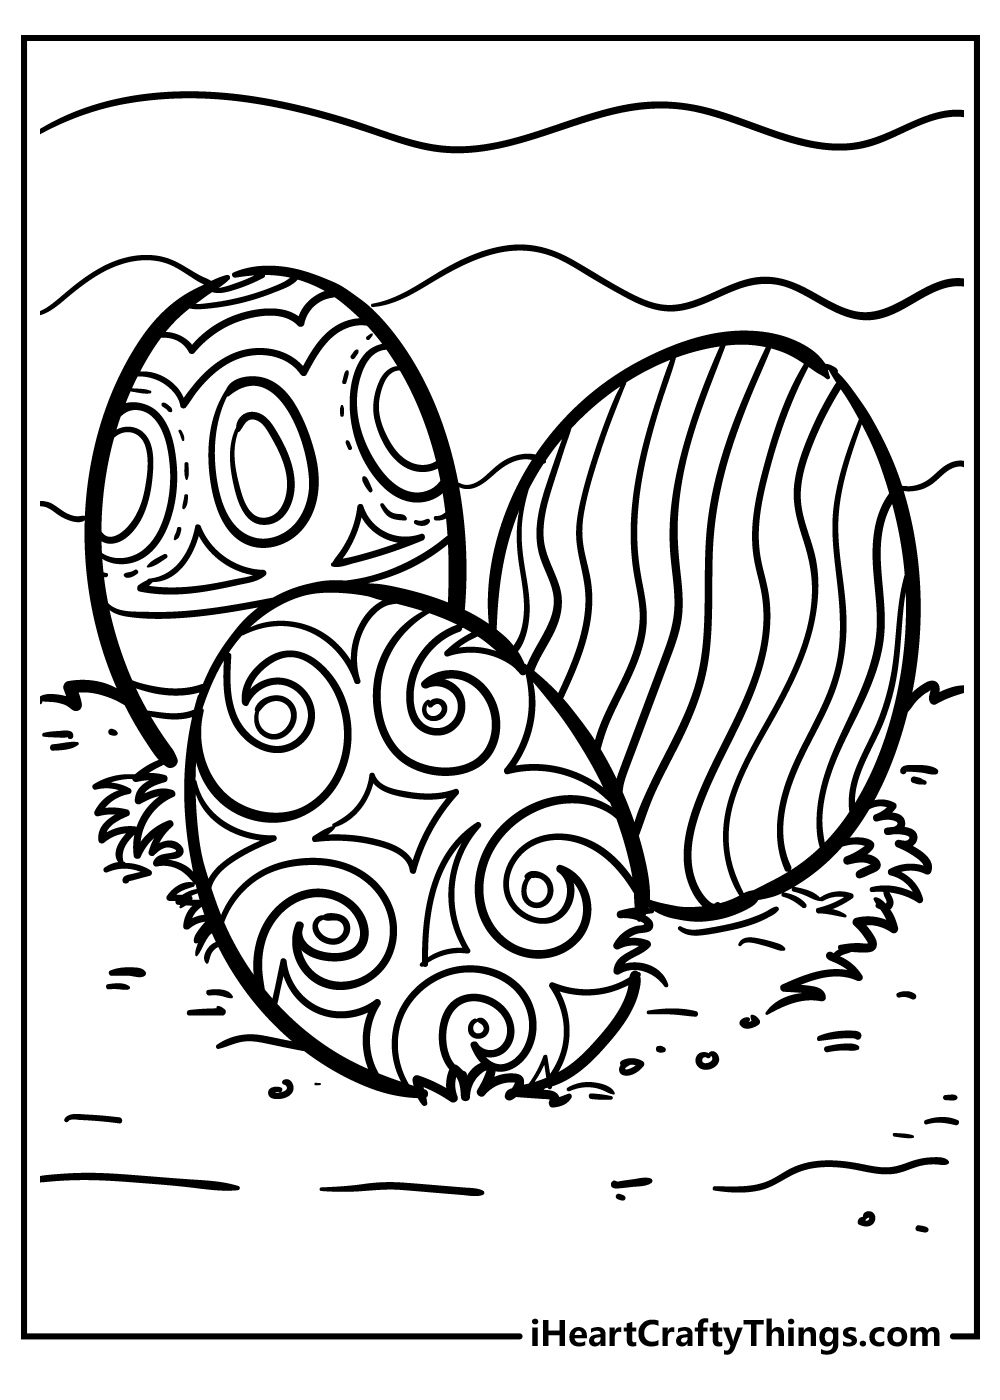 Easter egg coloring pages for kids free download